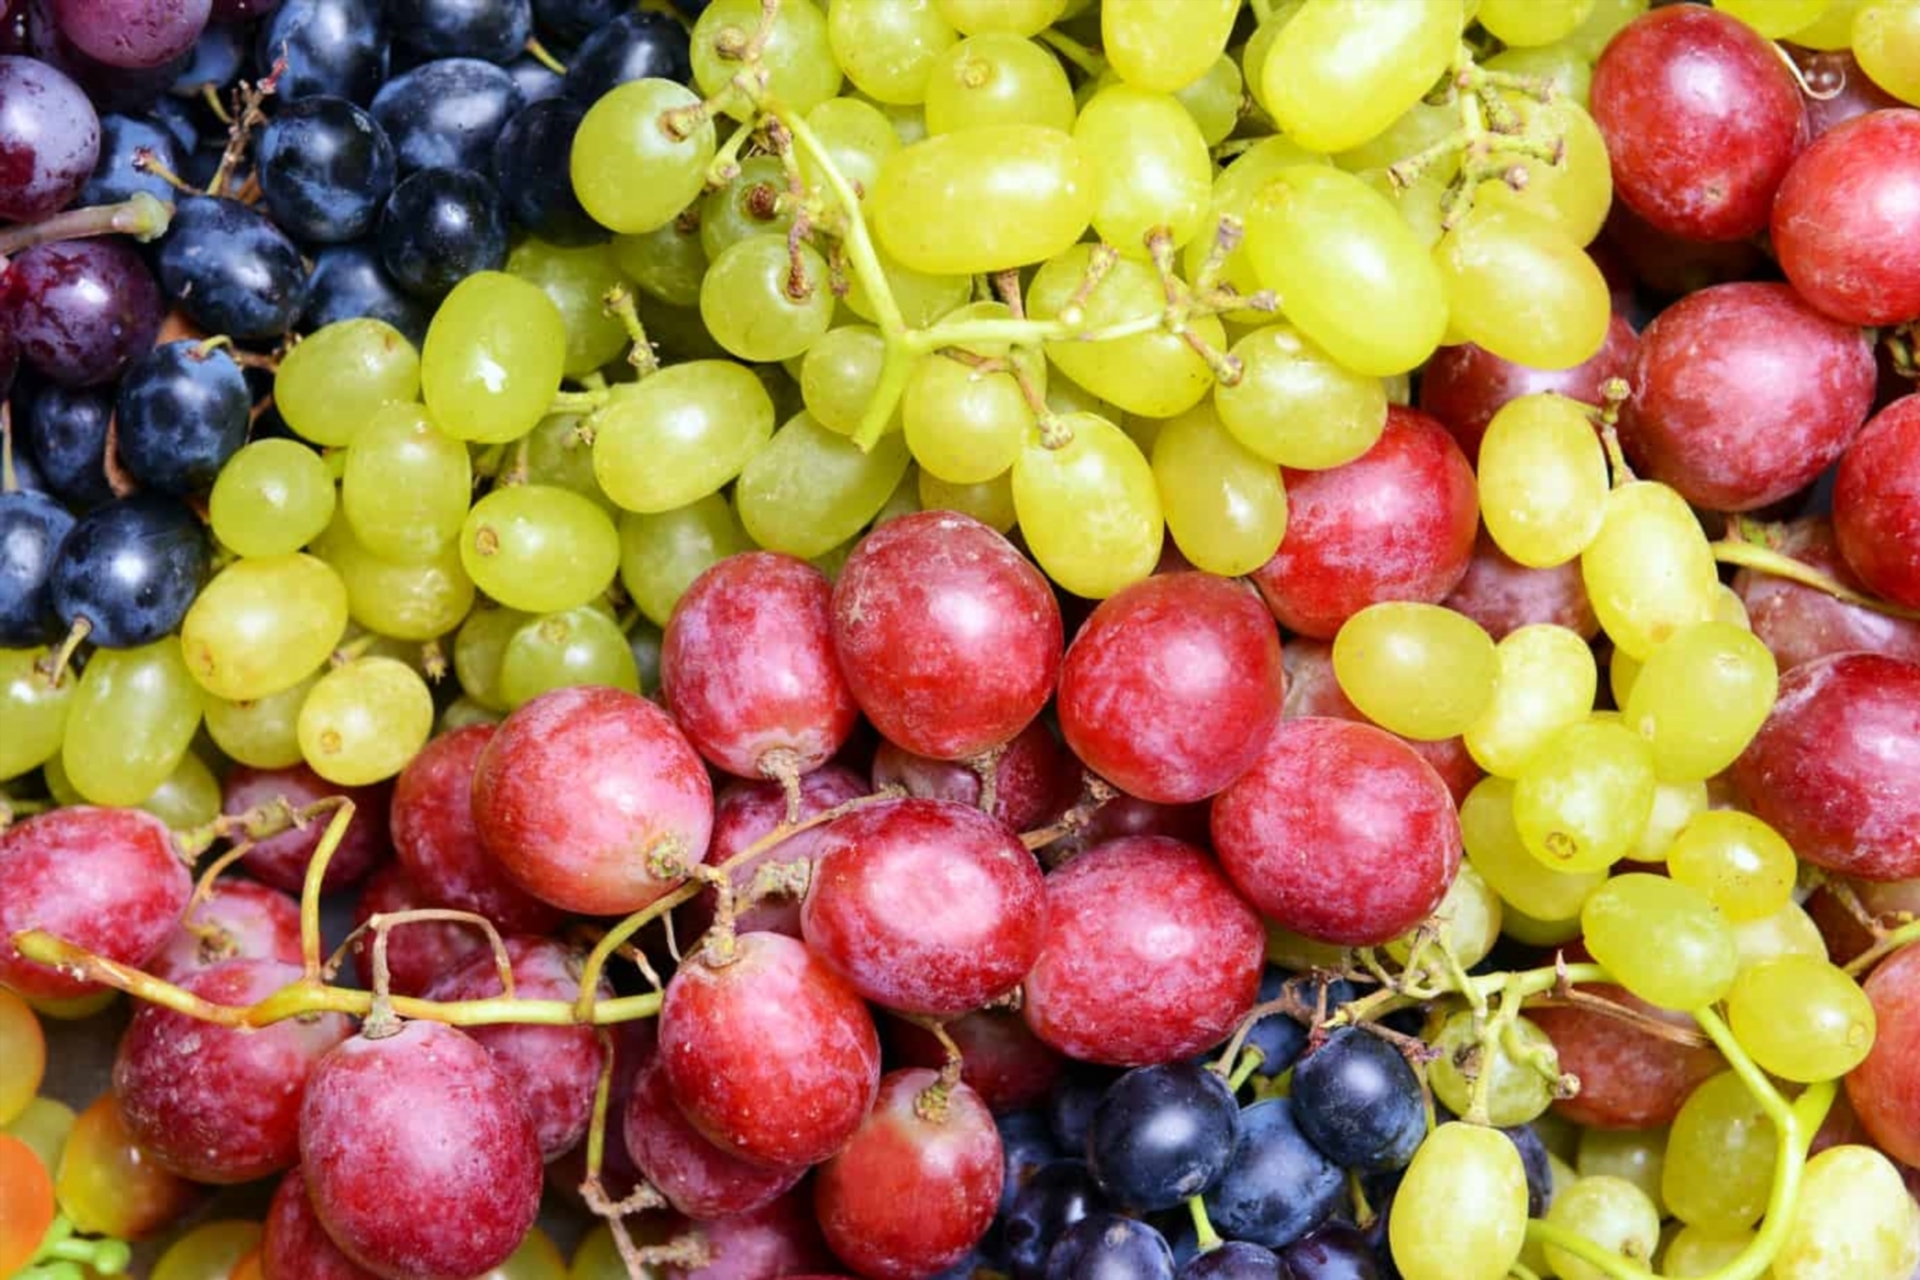 is dry grapes safe during pregnancy guide